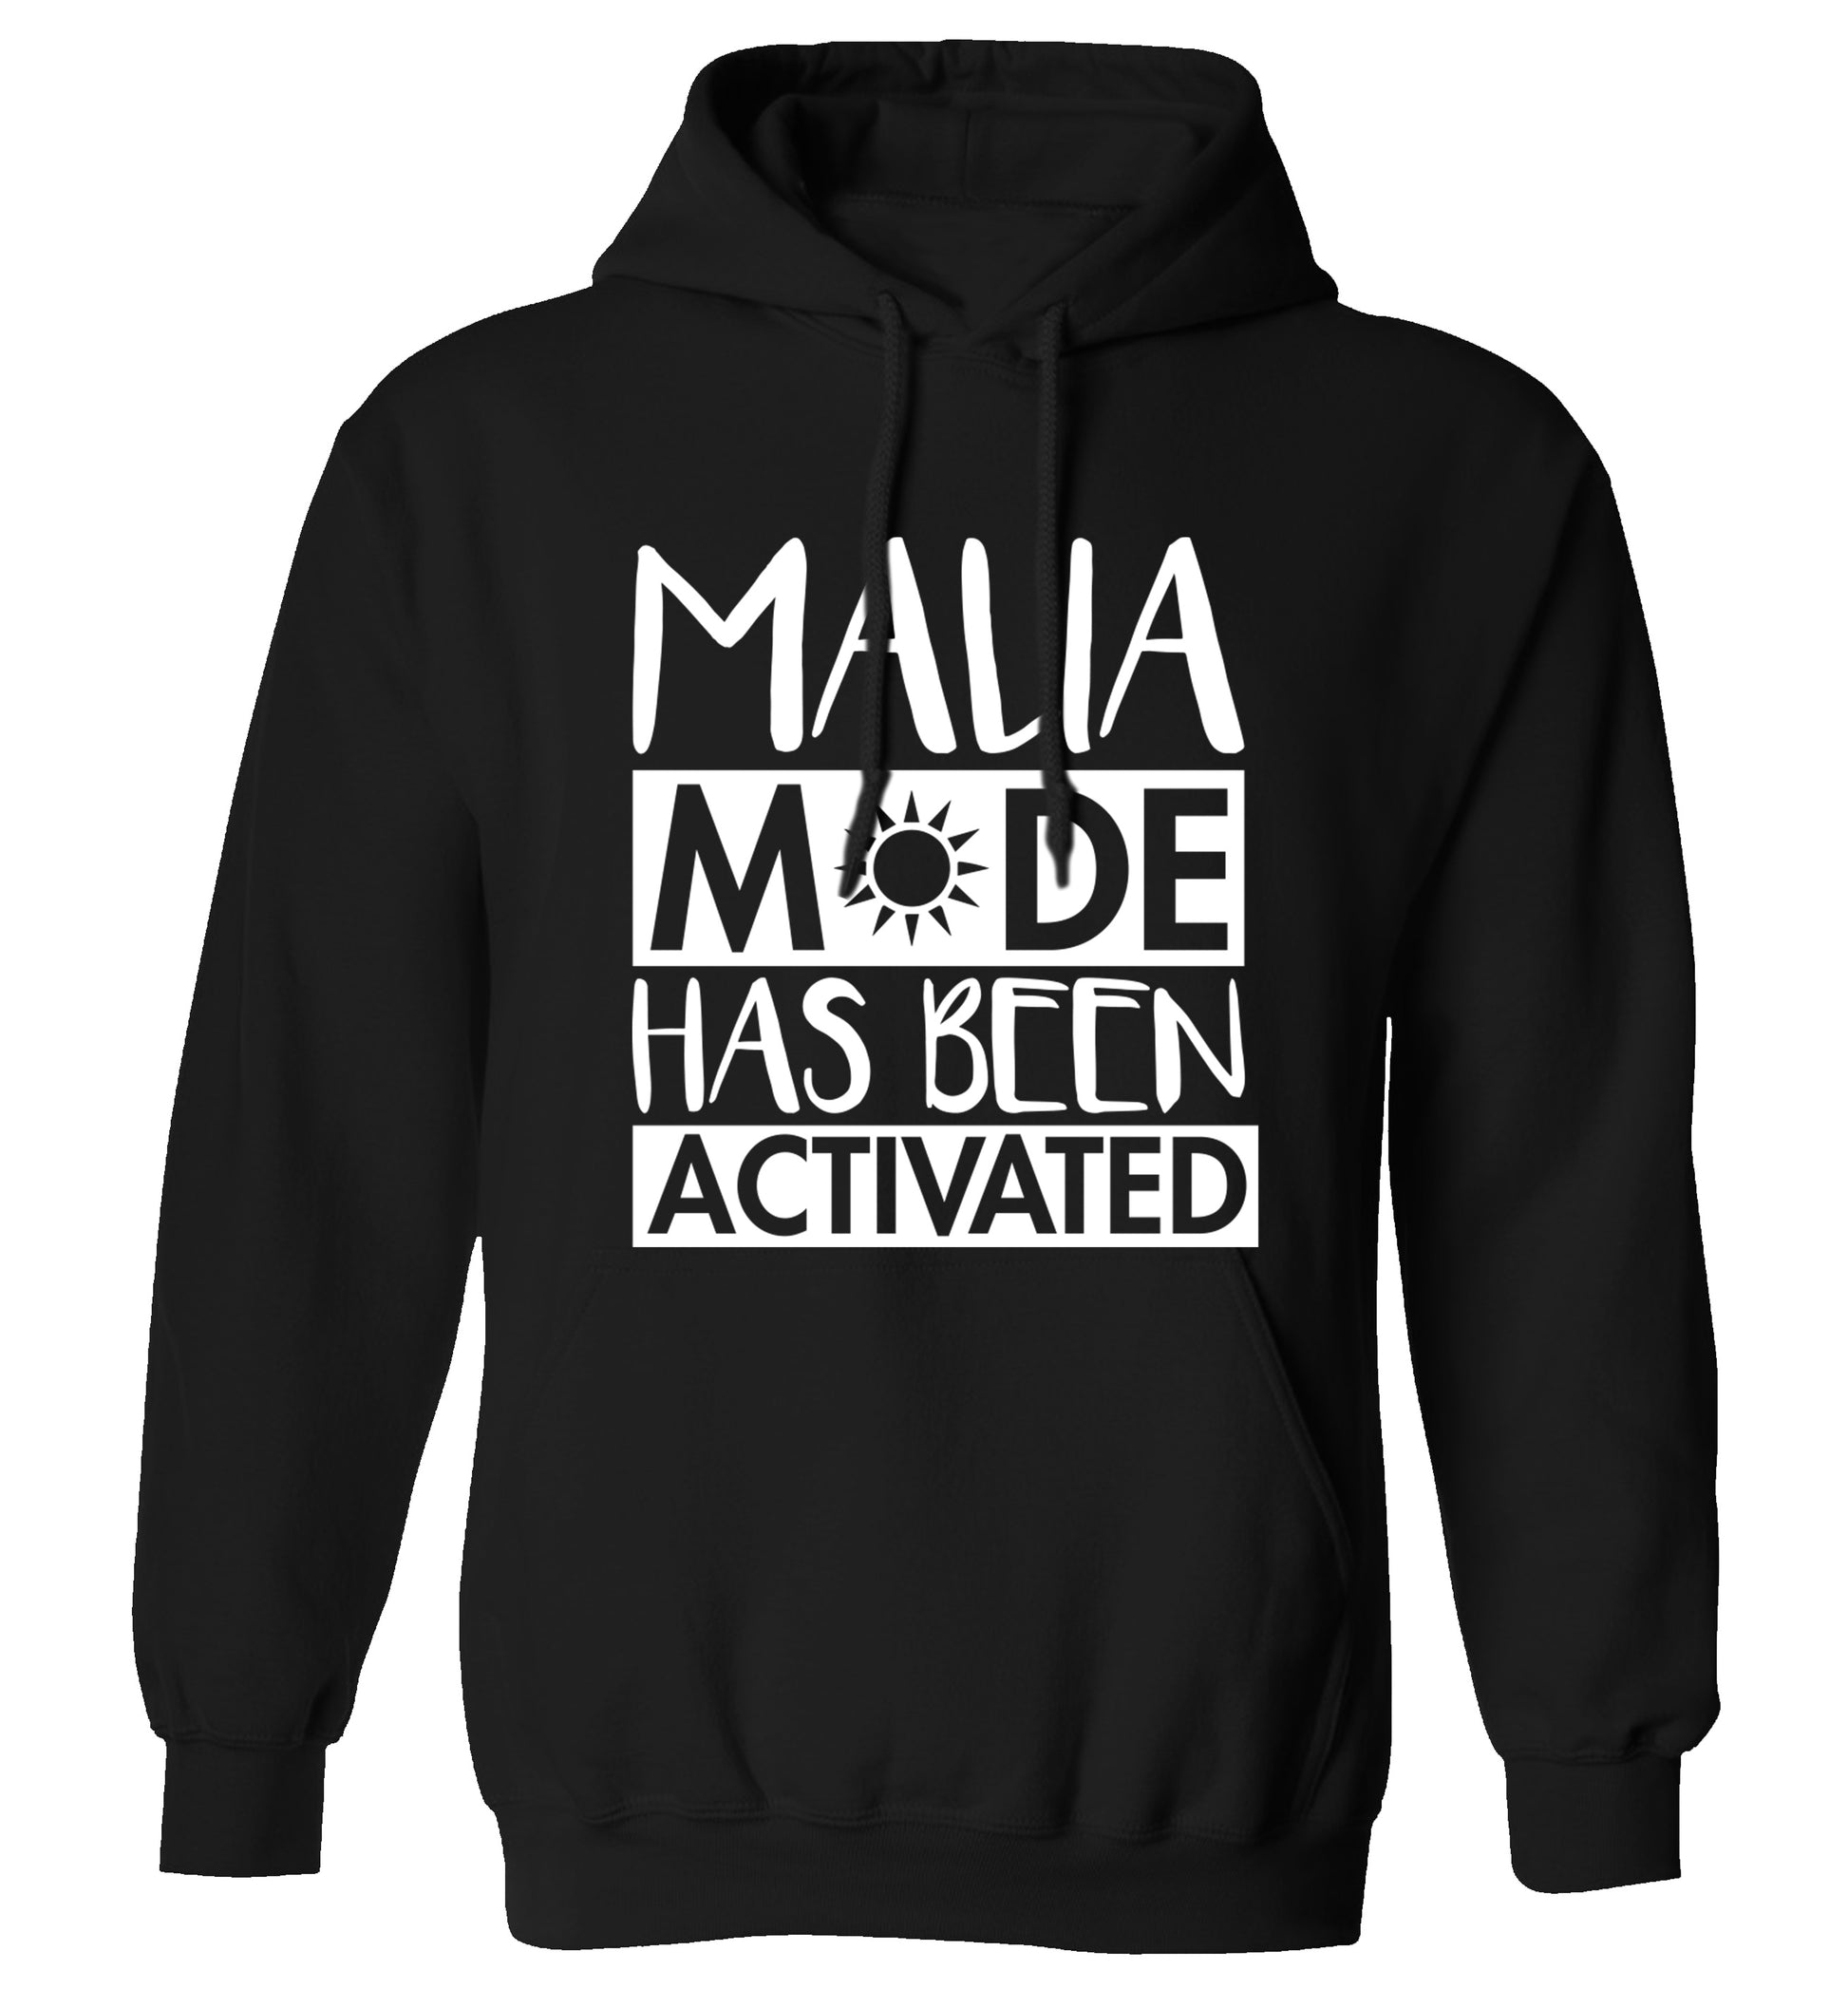 Malia mode has been activated adults unisex black hoodie 2XL